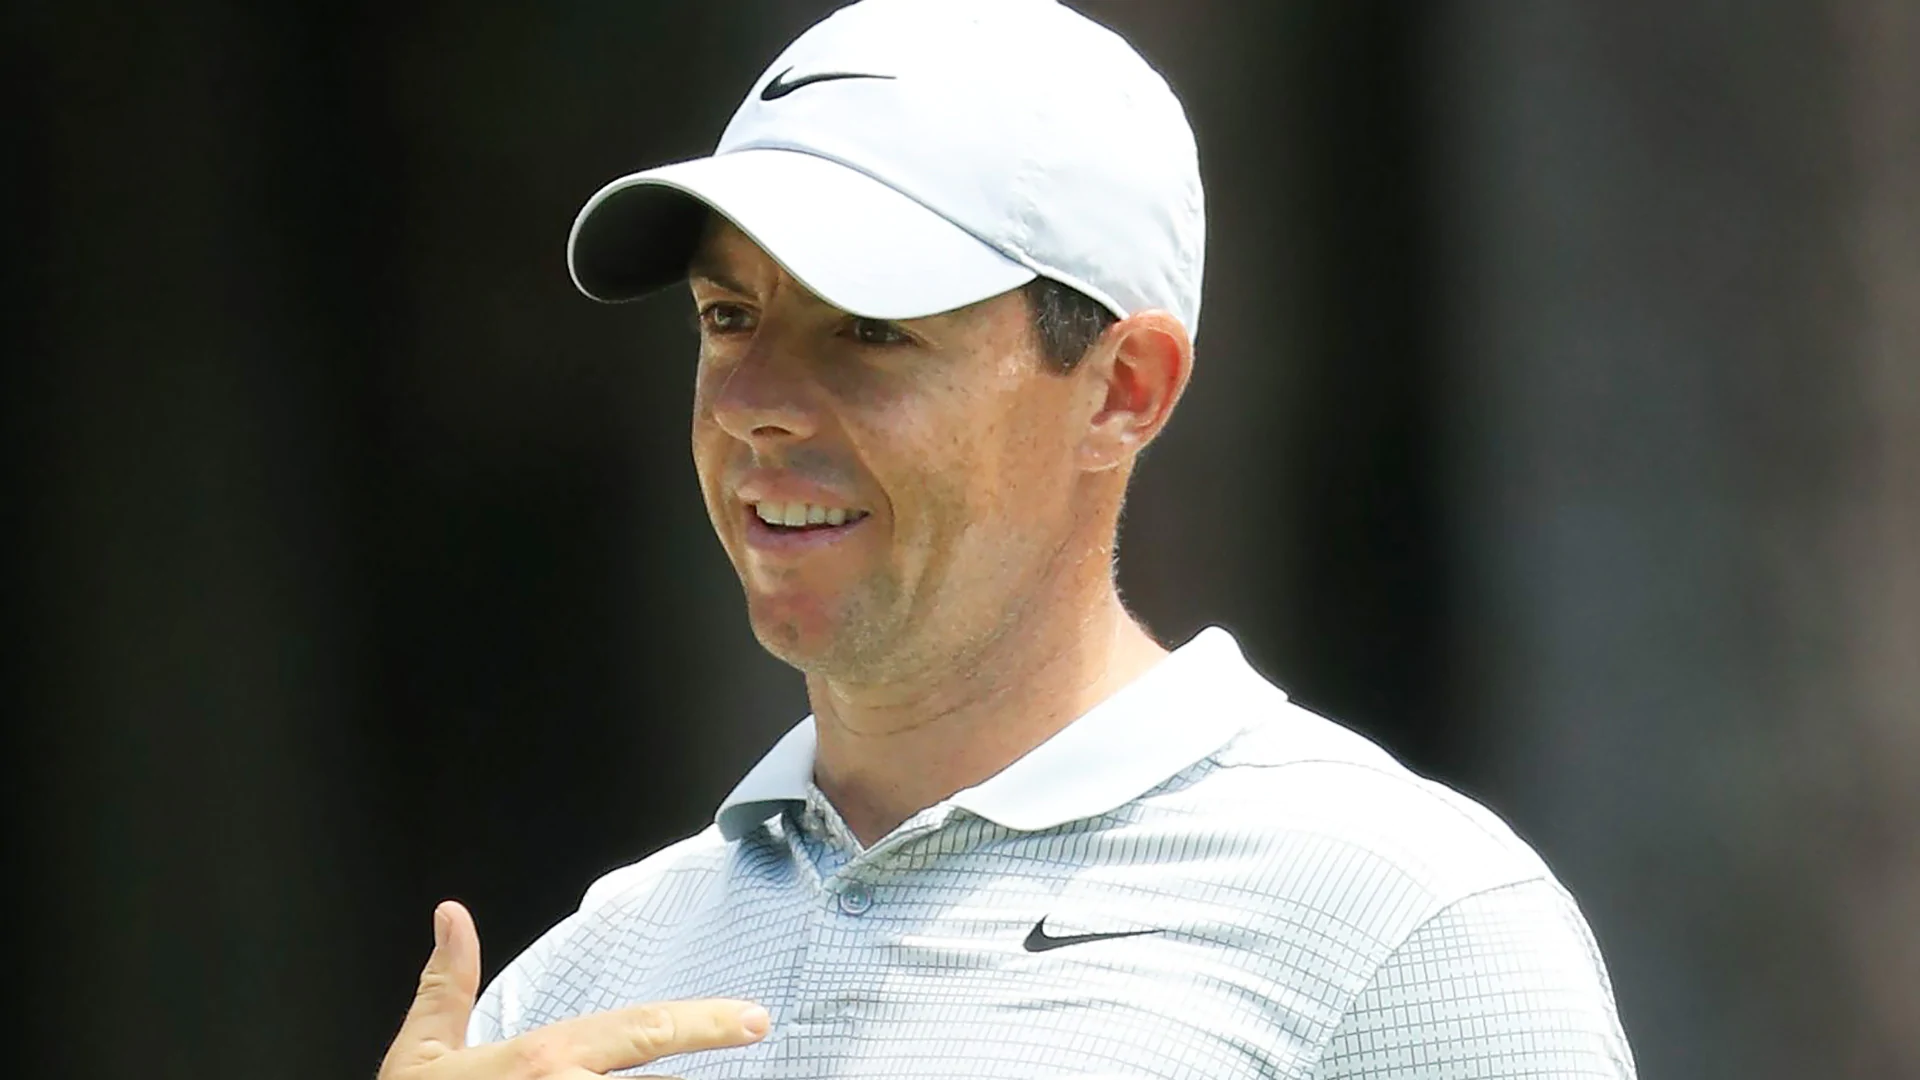 Rory McIlroy: ‘Silly’ to consider shutting down after COVID-19 related withdrawals